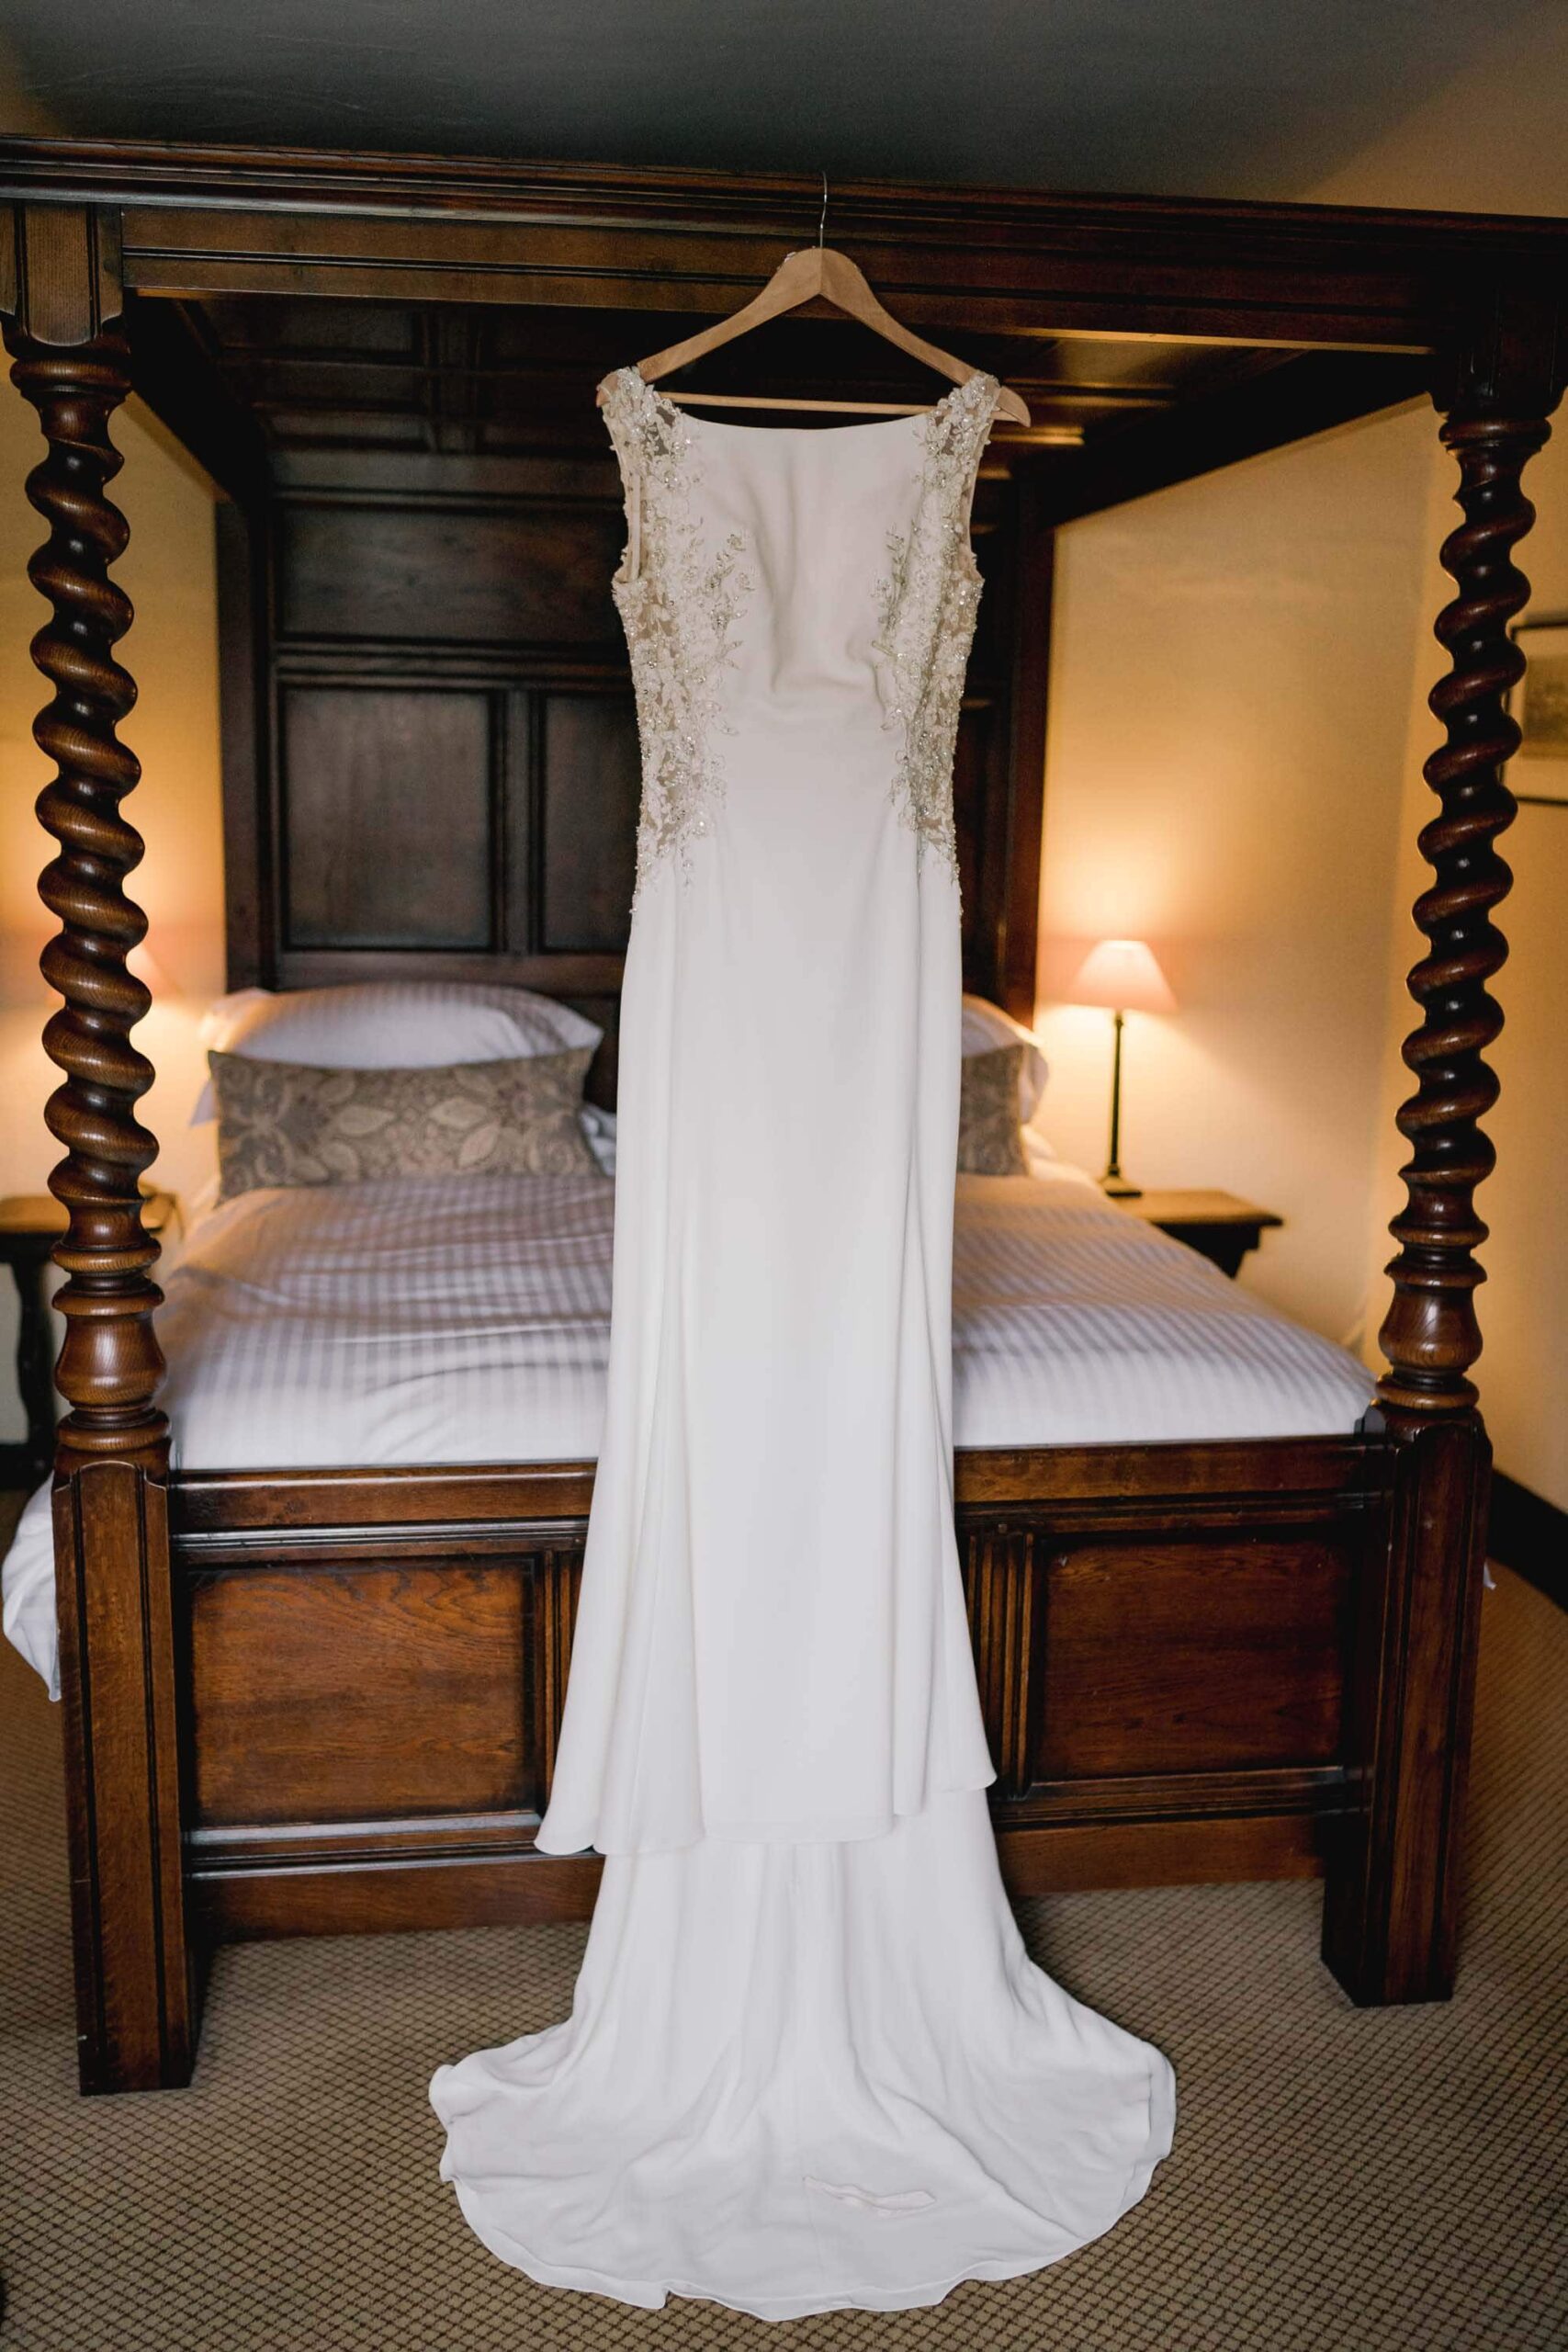 Wedding dress hanging on a four poster bed.